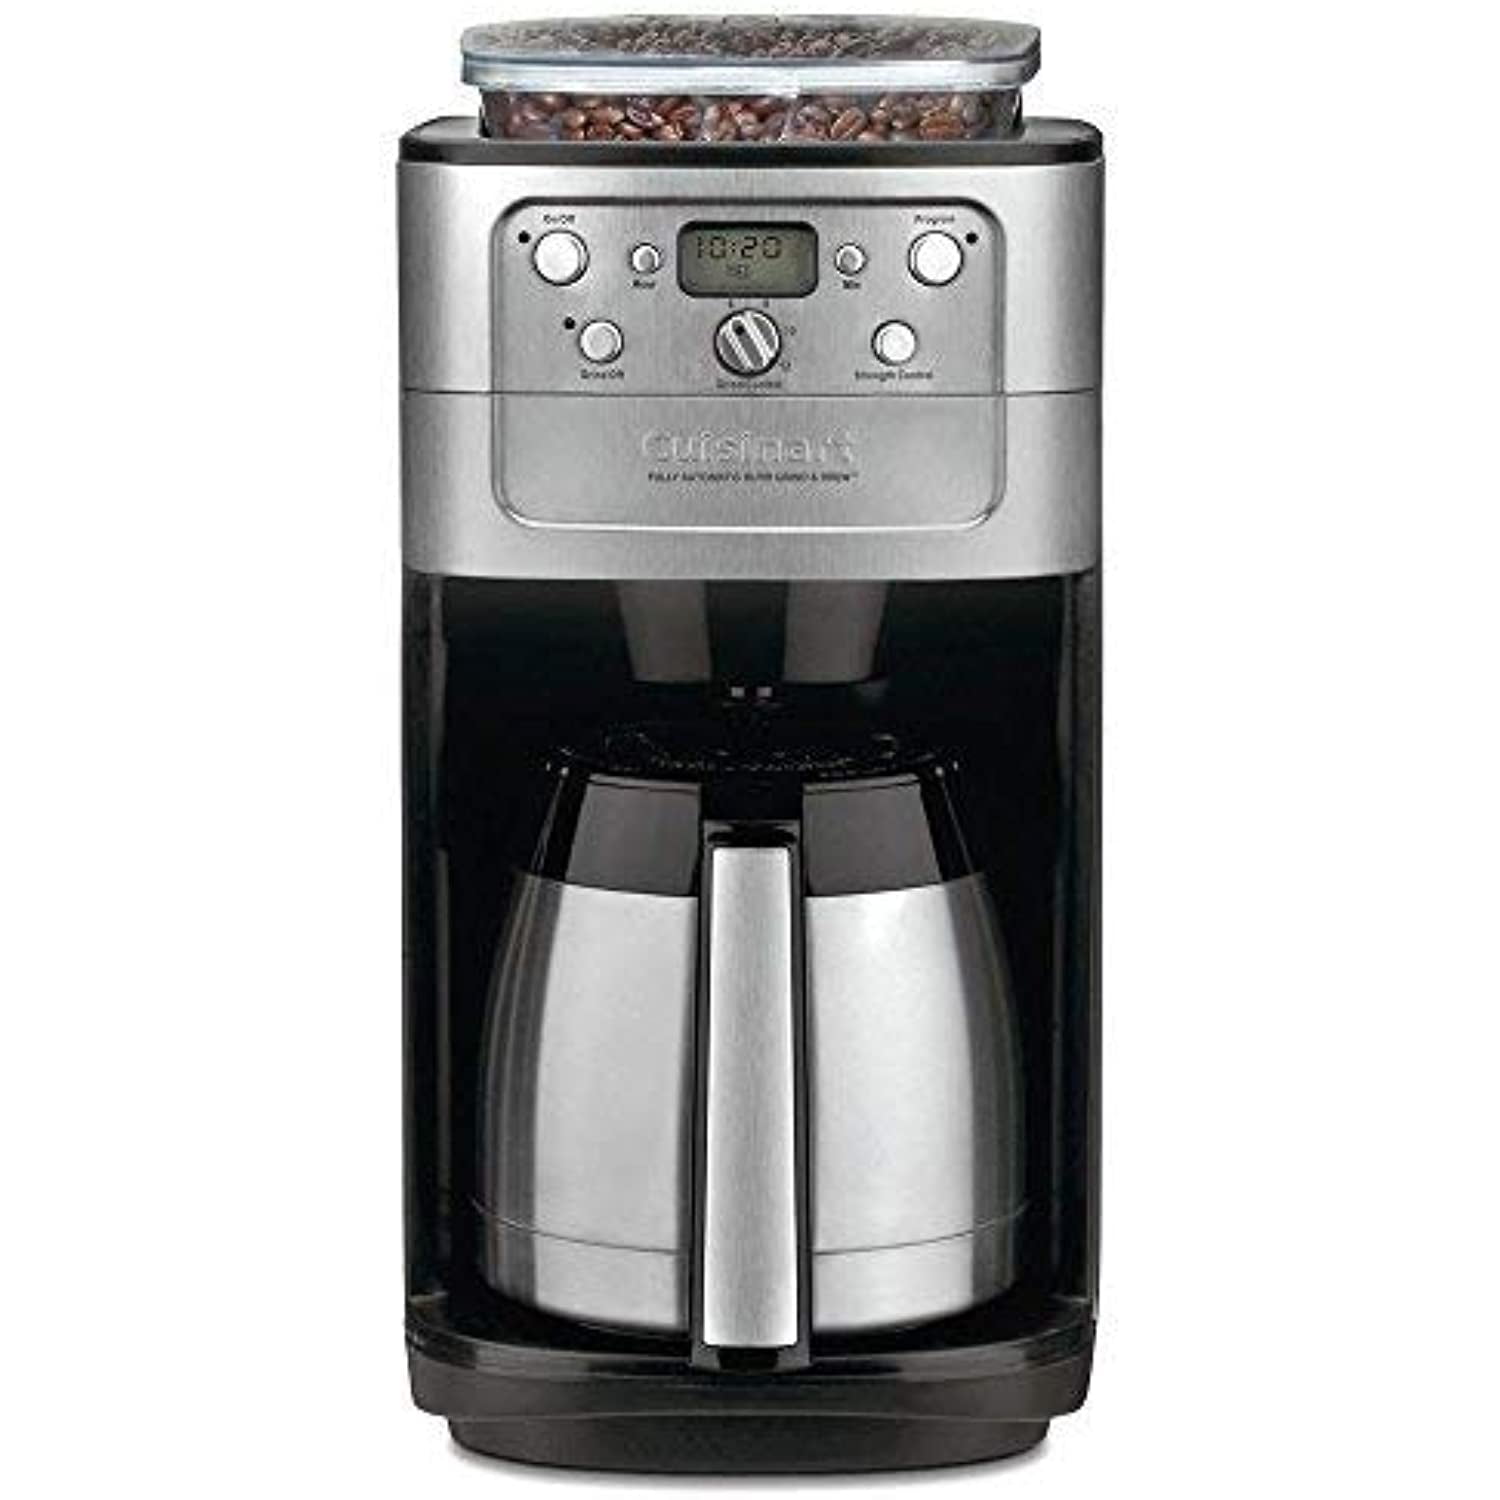 Premium Levella 3-Cup Grind-and-Brew Coffee Maker with Travel Mug Black (pcm353)